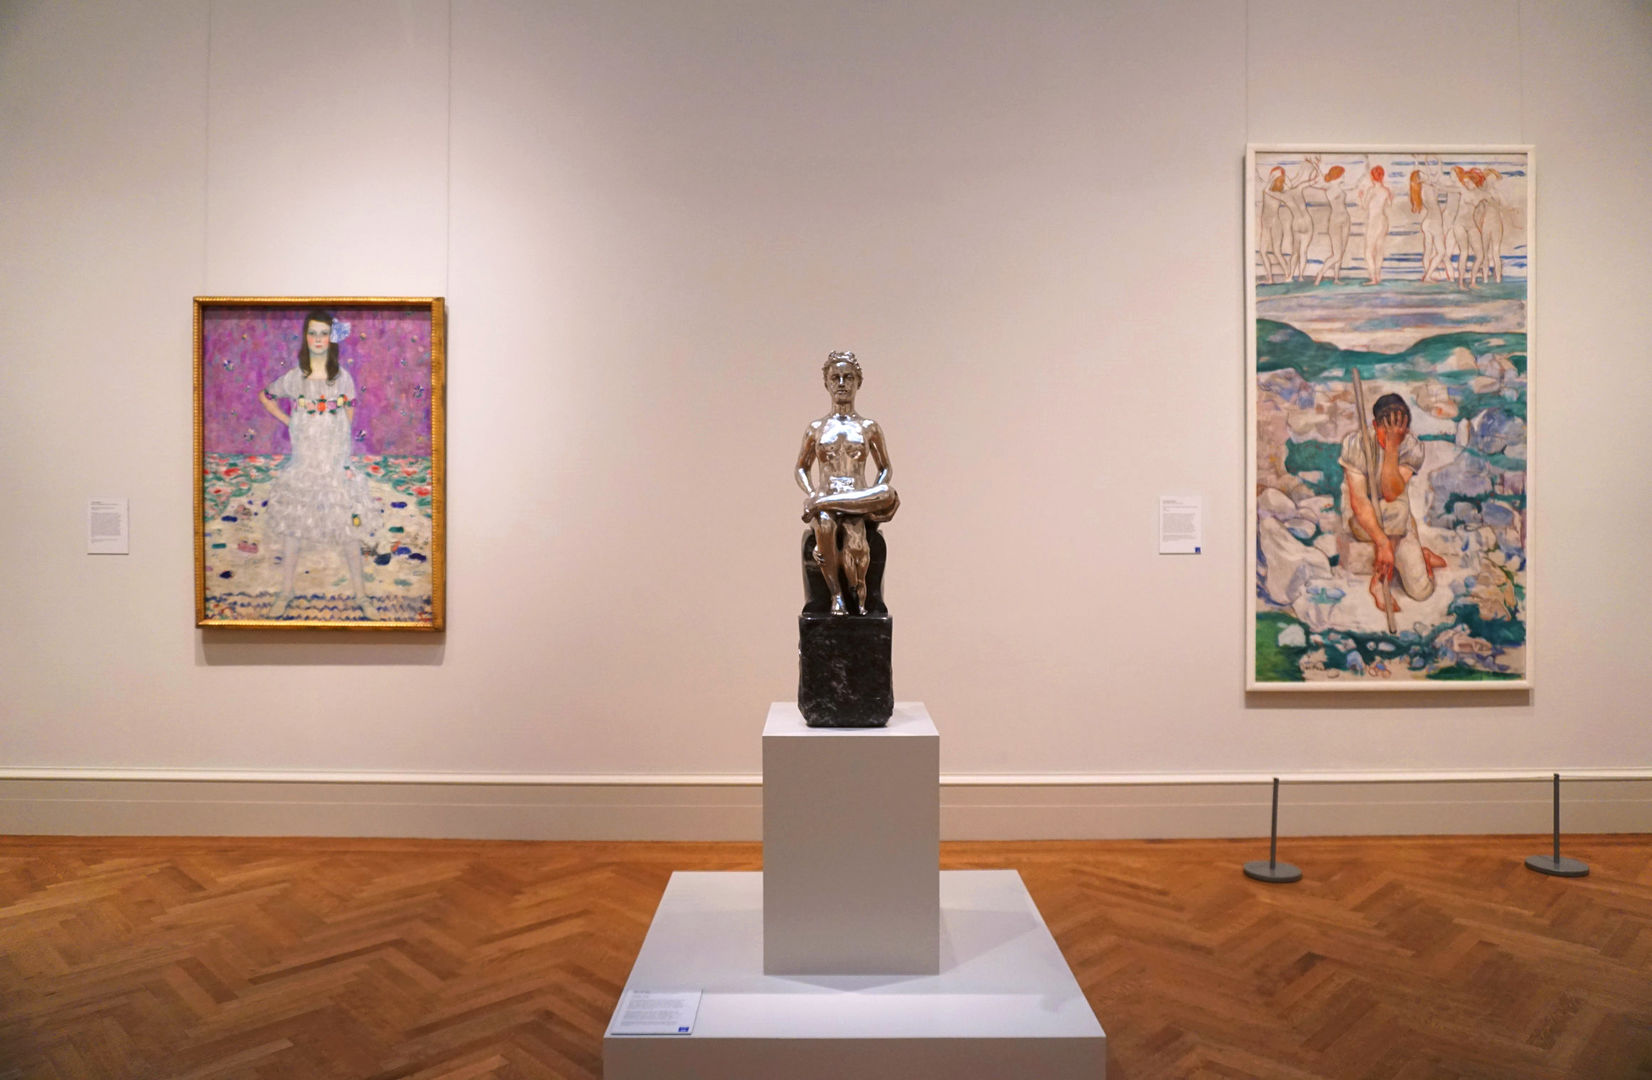 Gallery view of a silver sculpture by Max Klinger installed between two paintings by Gustav Klimt and Ferdinand Hodler